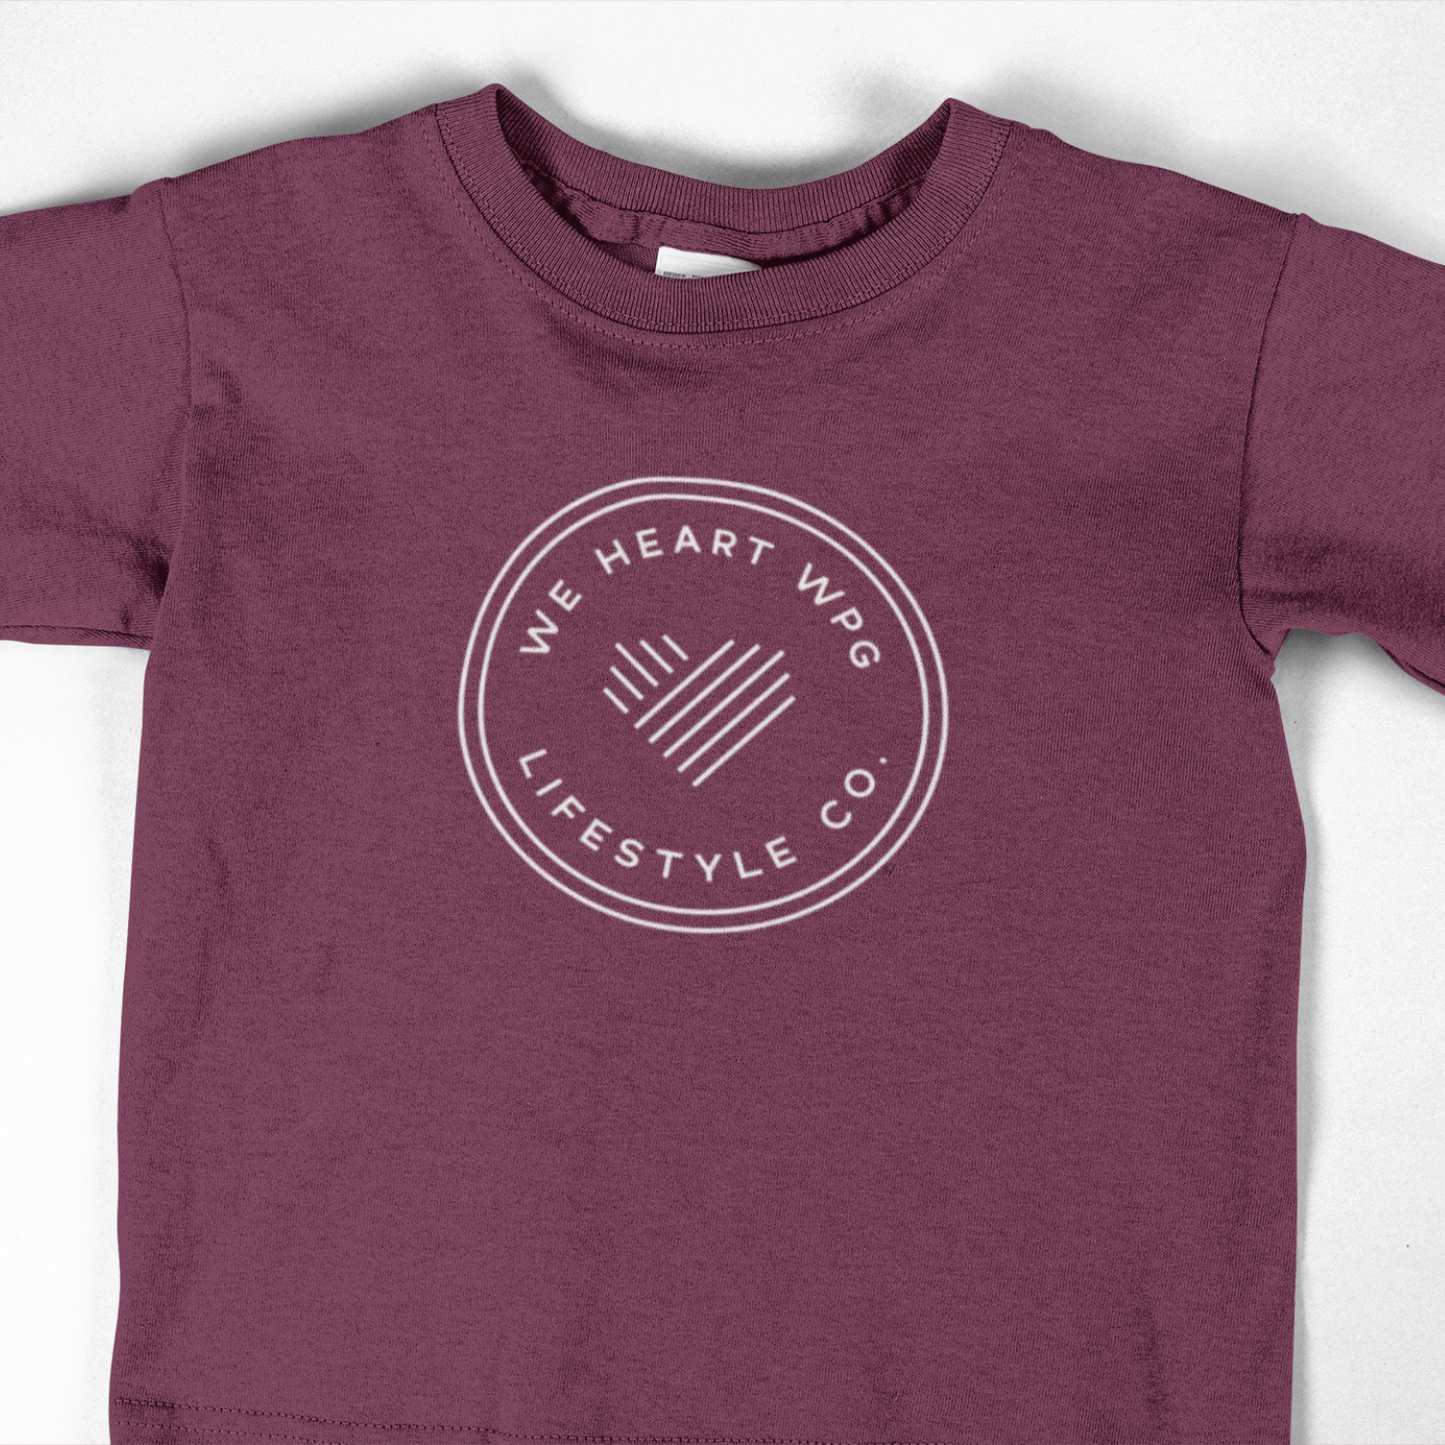 WHW Lifestyle Youth Tee | Maroon